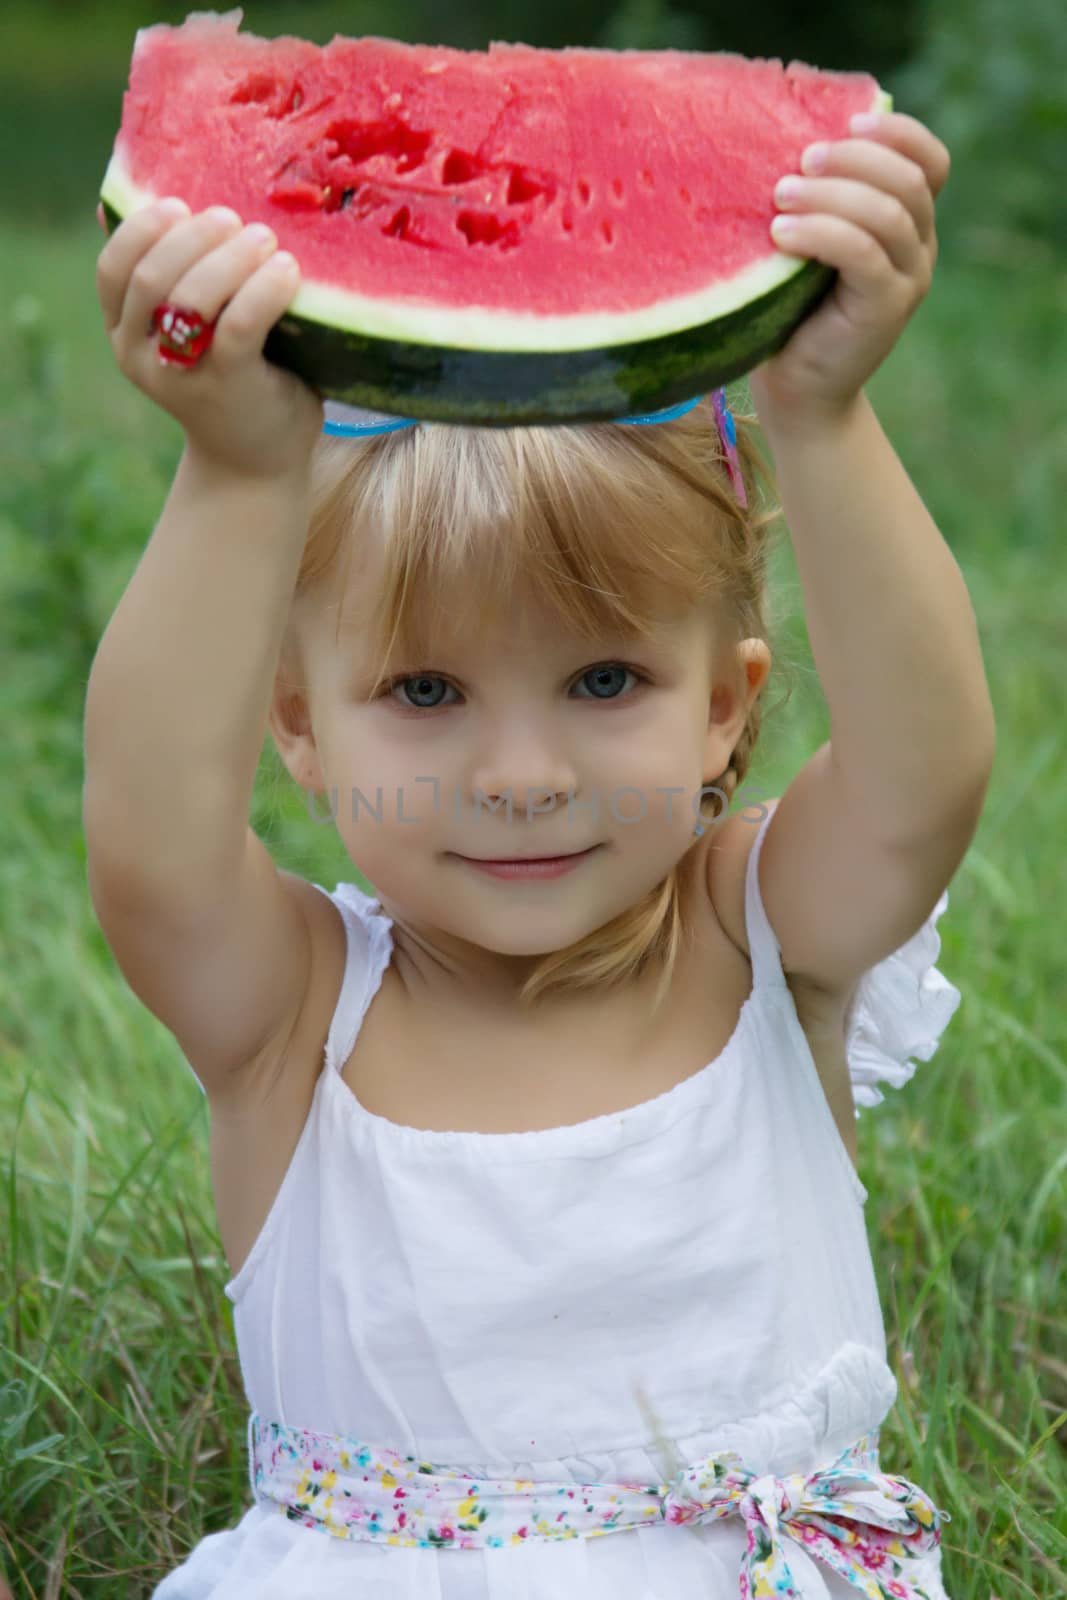 Little girl holding slice of watermelon outdoors by Angel_a